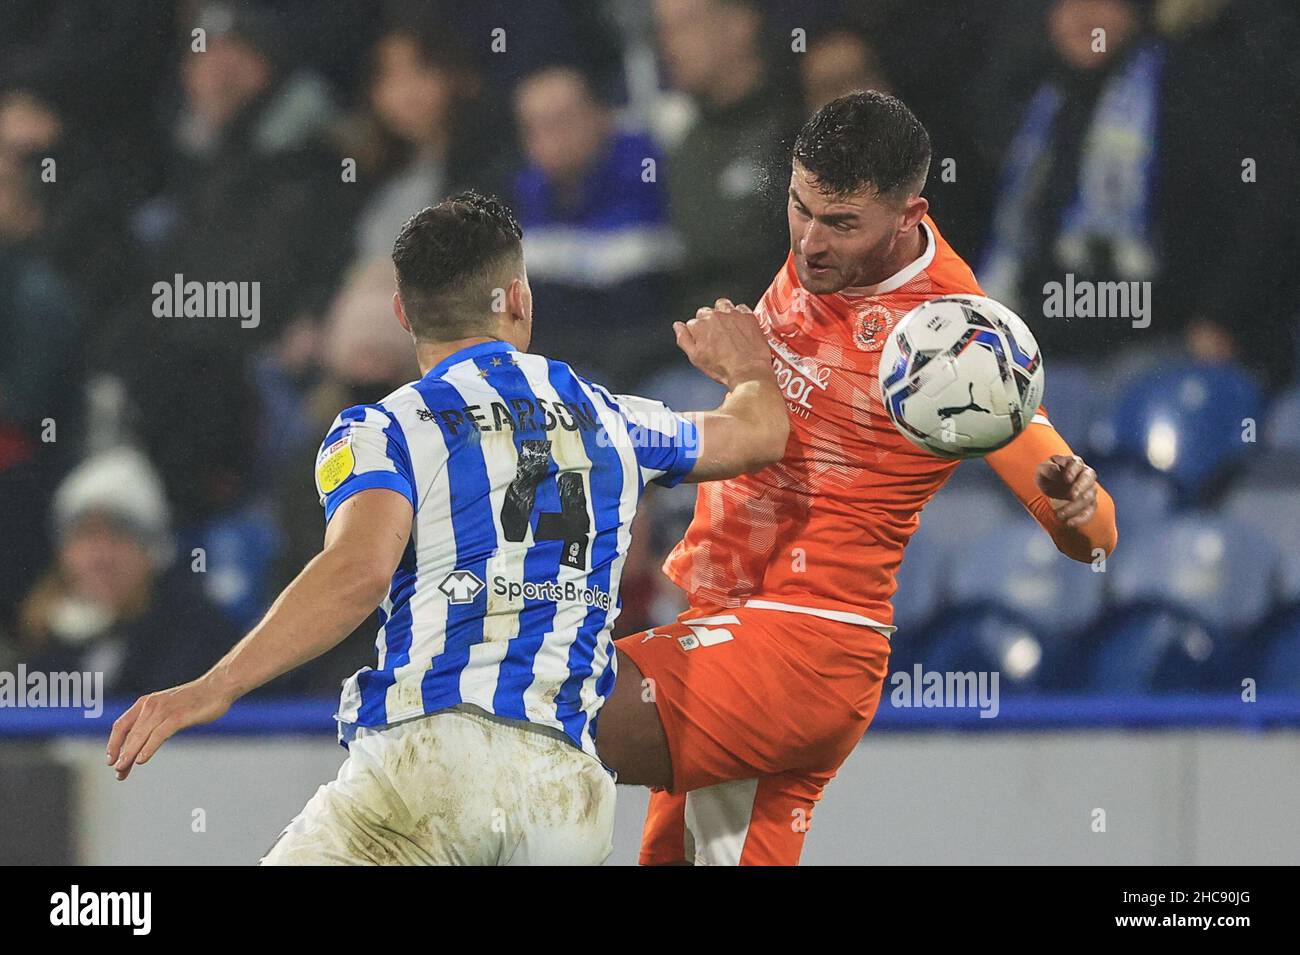 Gary Madine #14 of Blackpool wins the ball from Matty Pearson #4 of Huddersfield Town Stock Photo